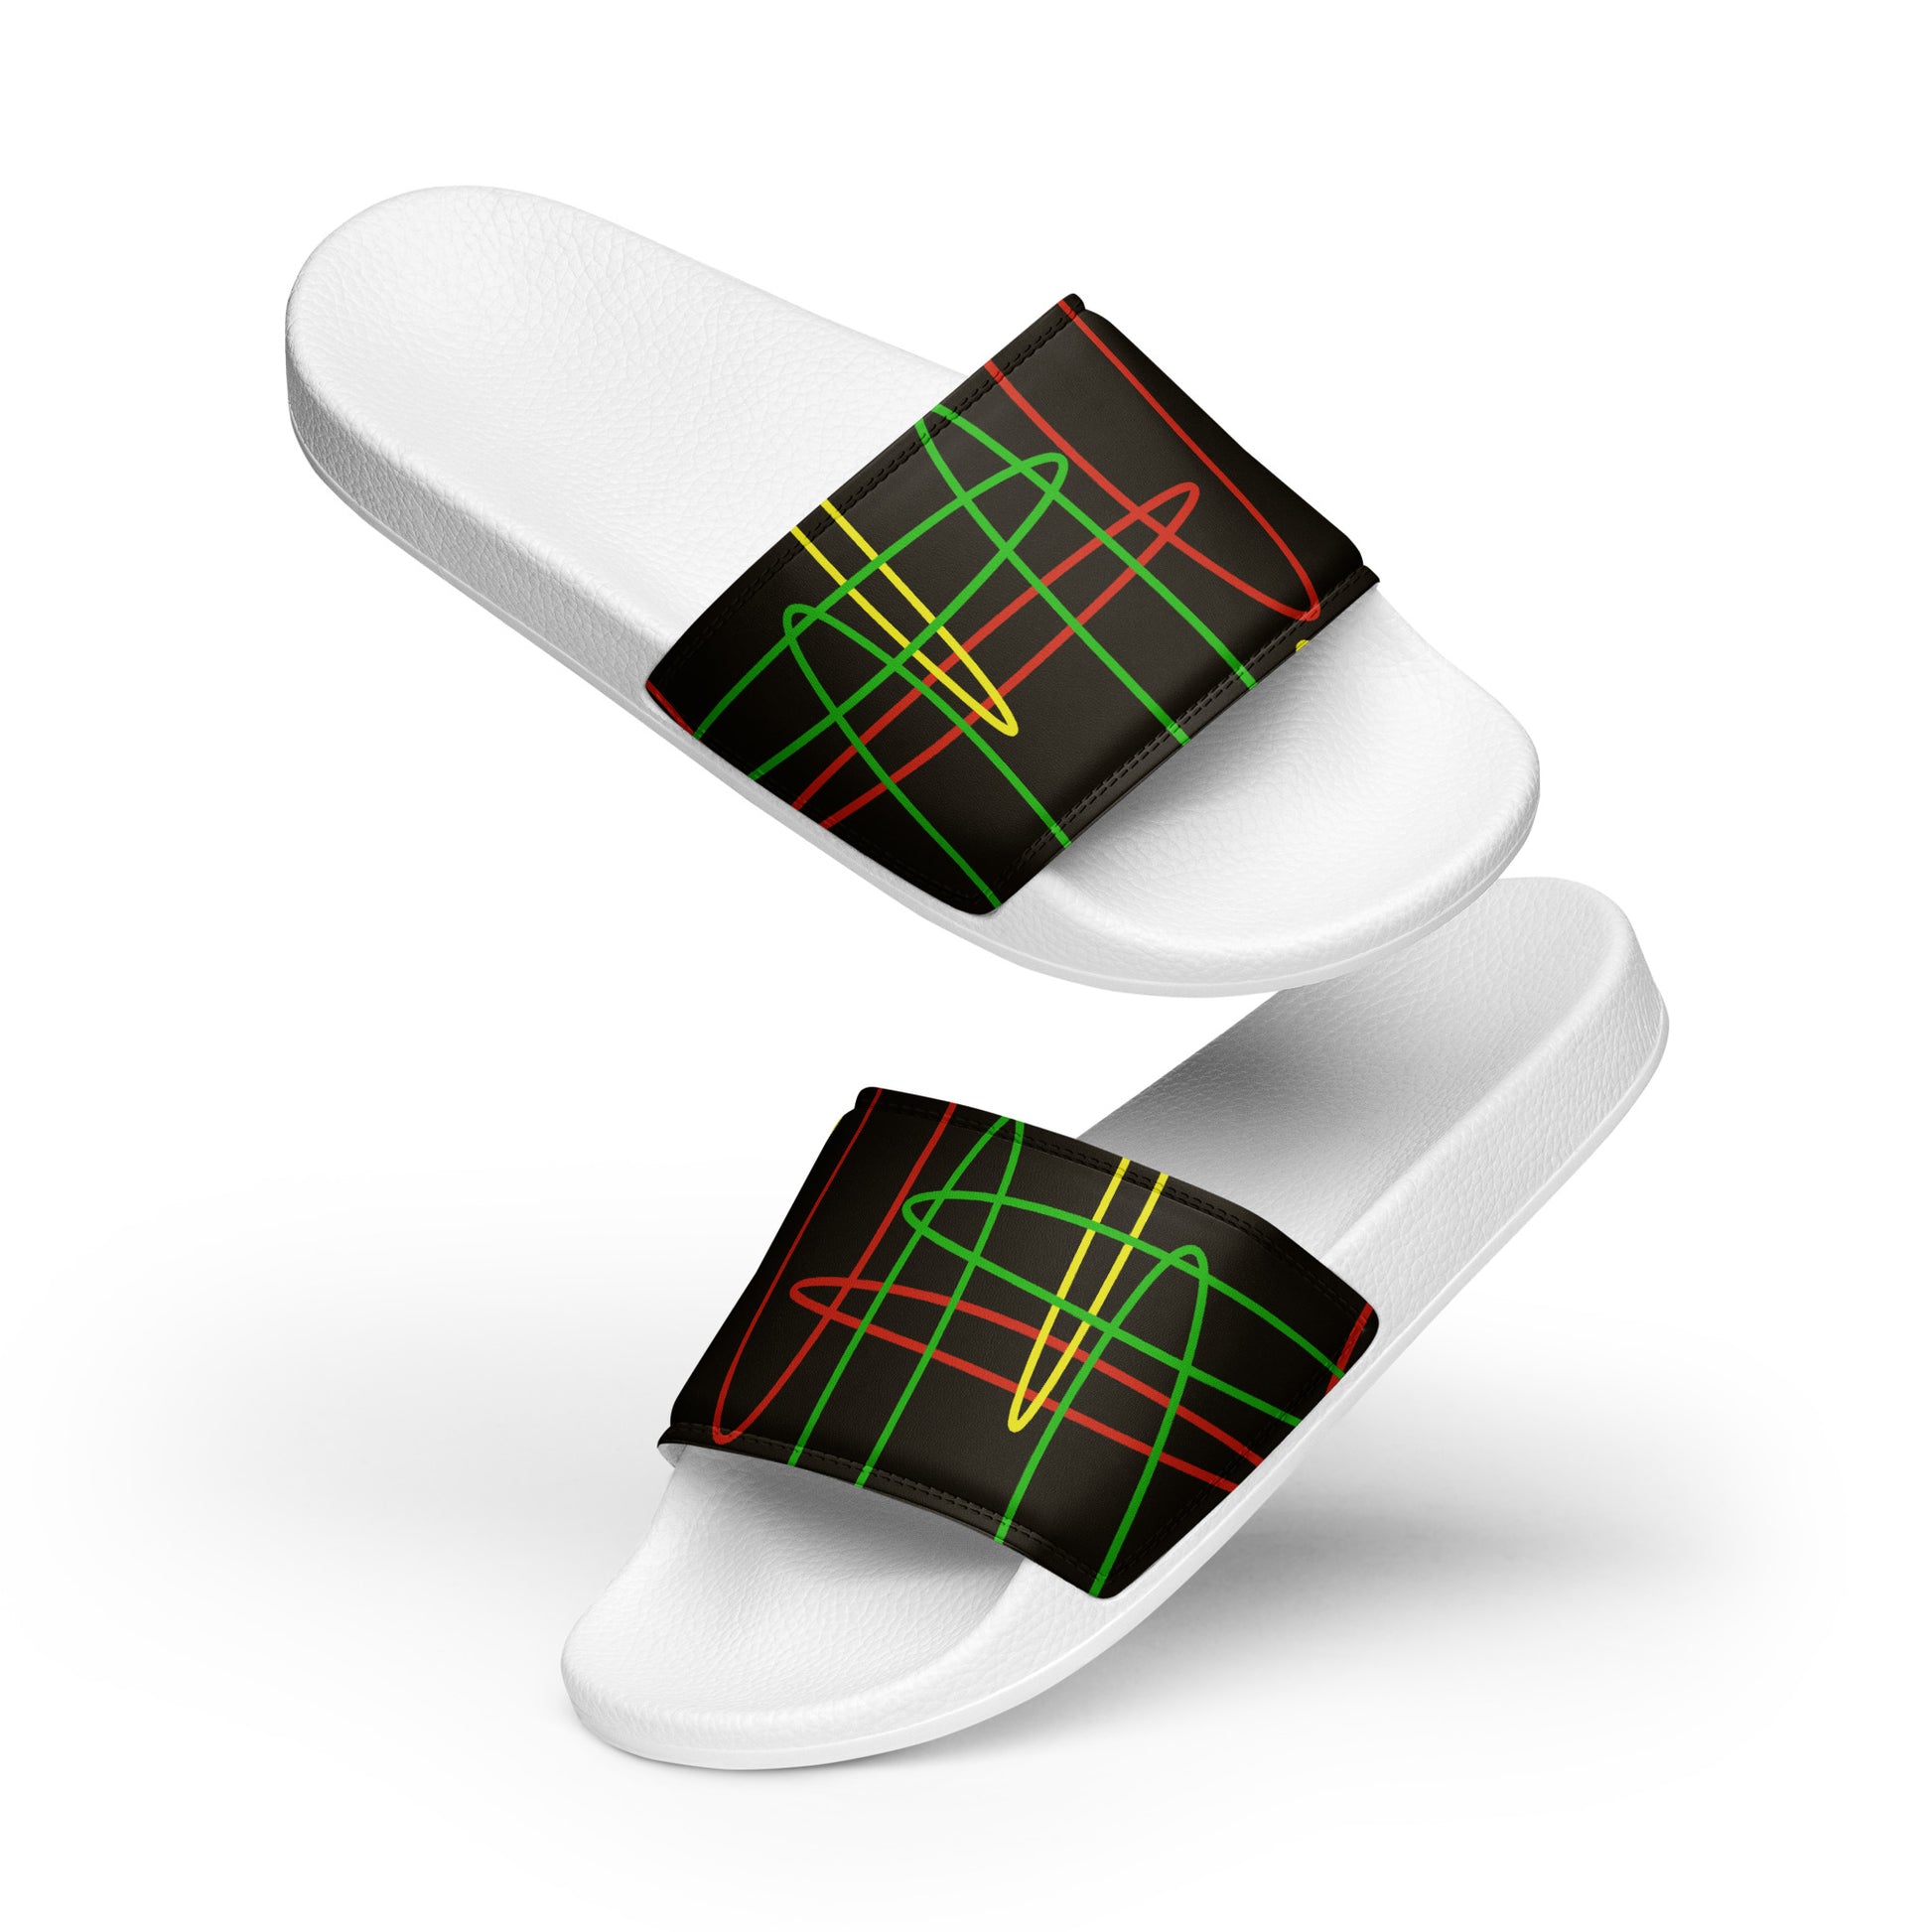 Abstract Men’s slides - O By Onica Online Store